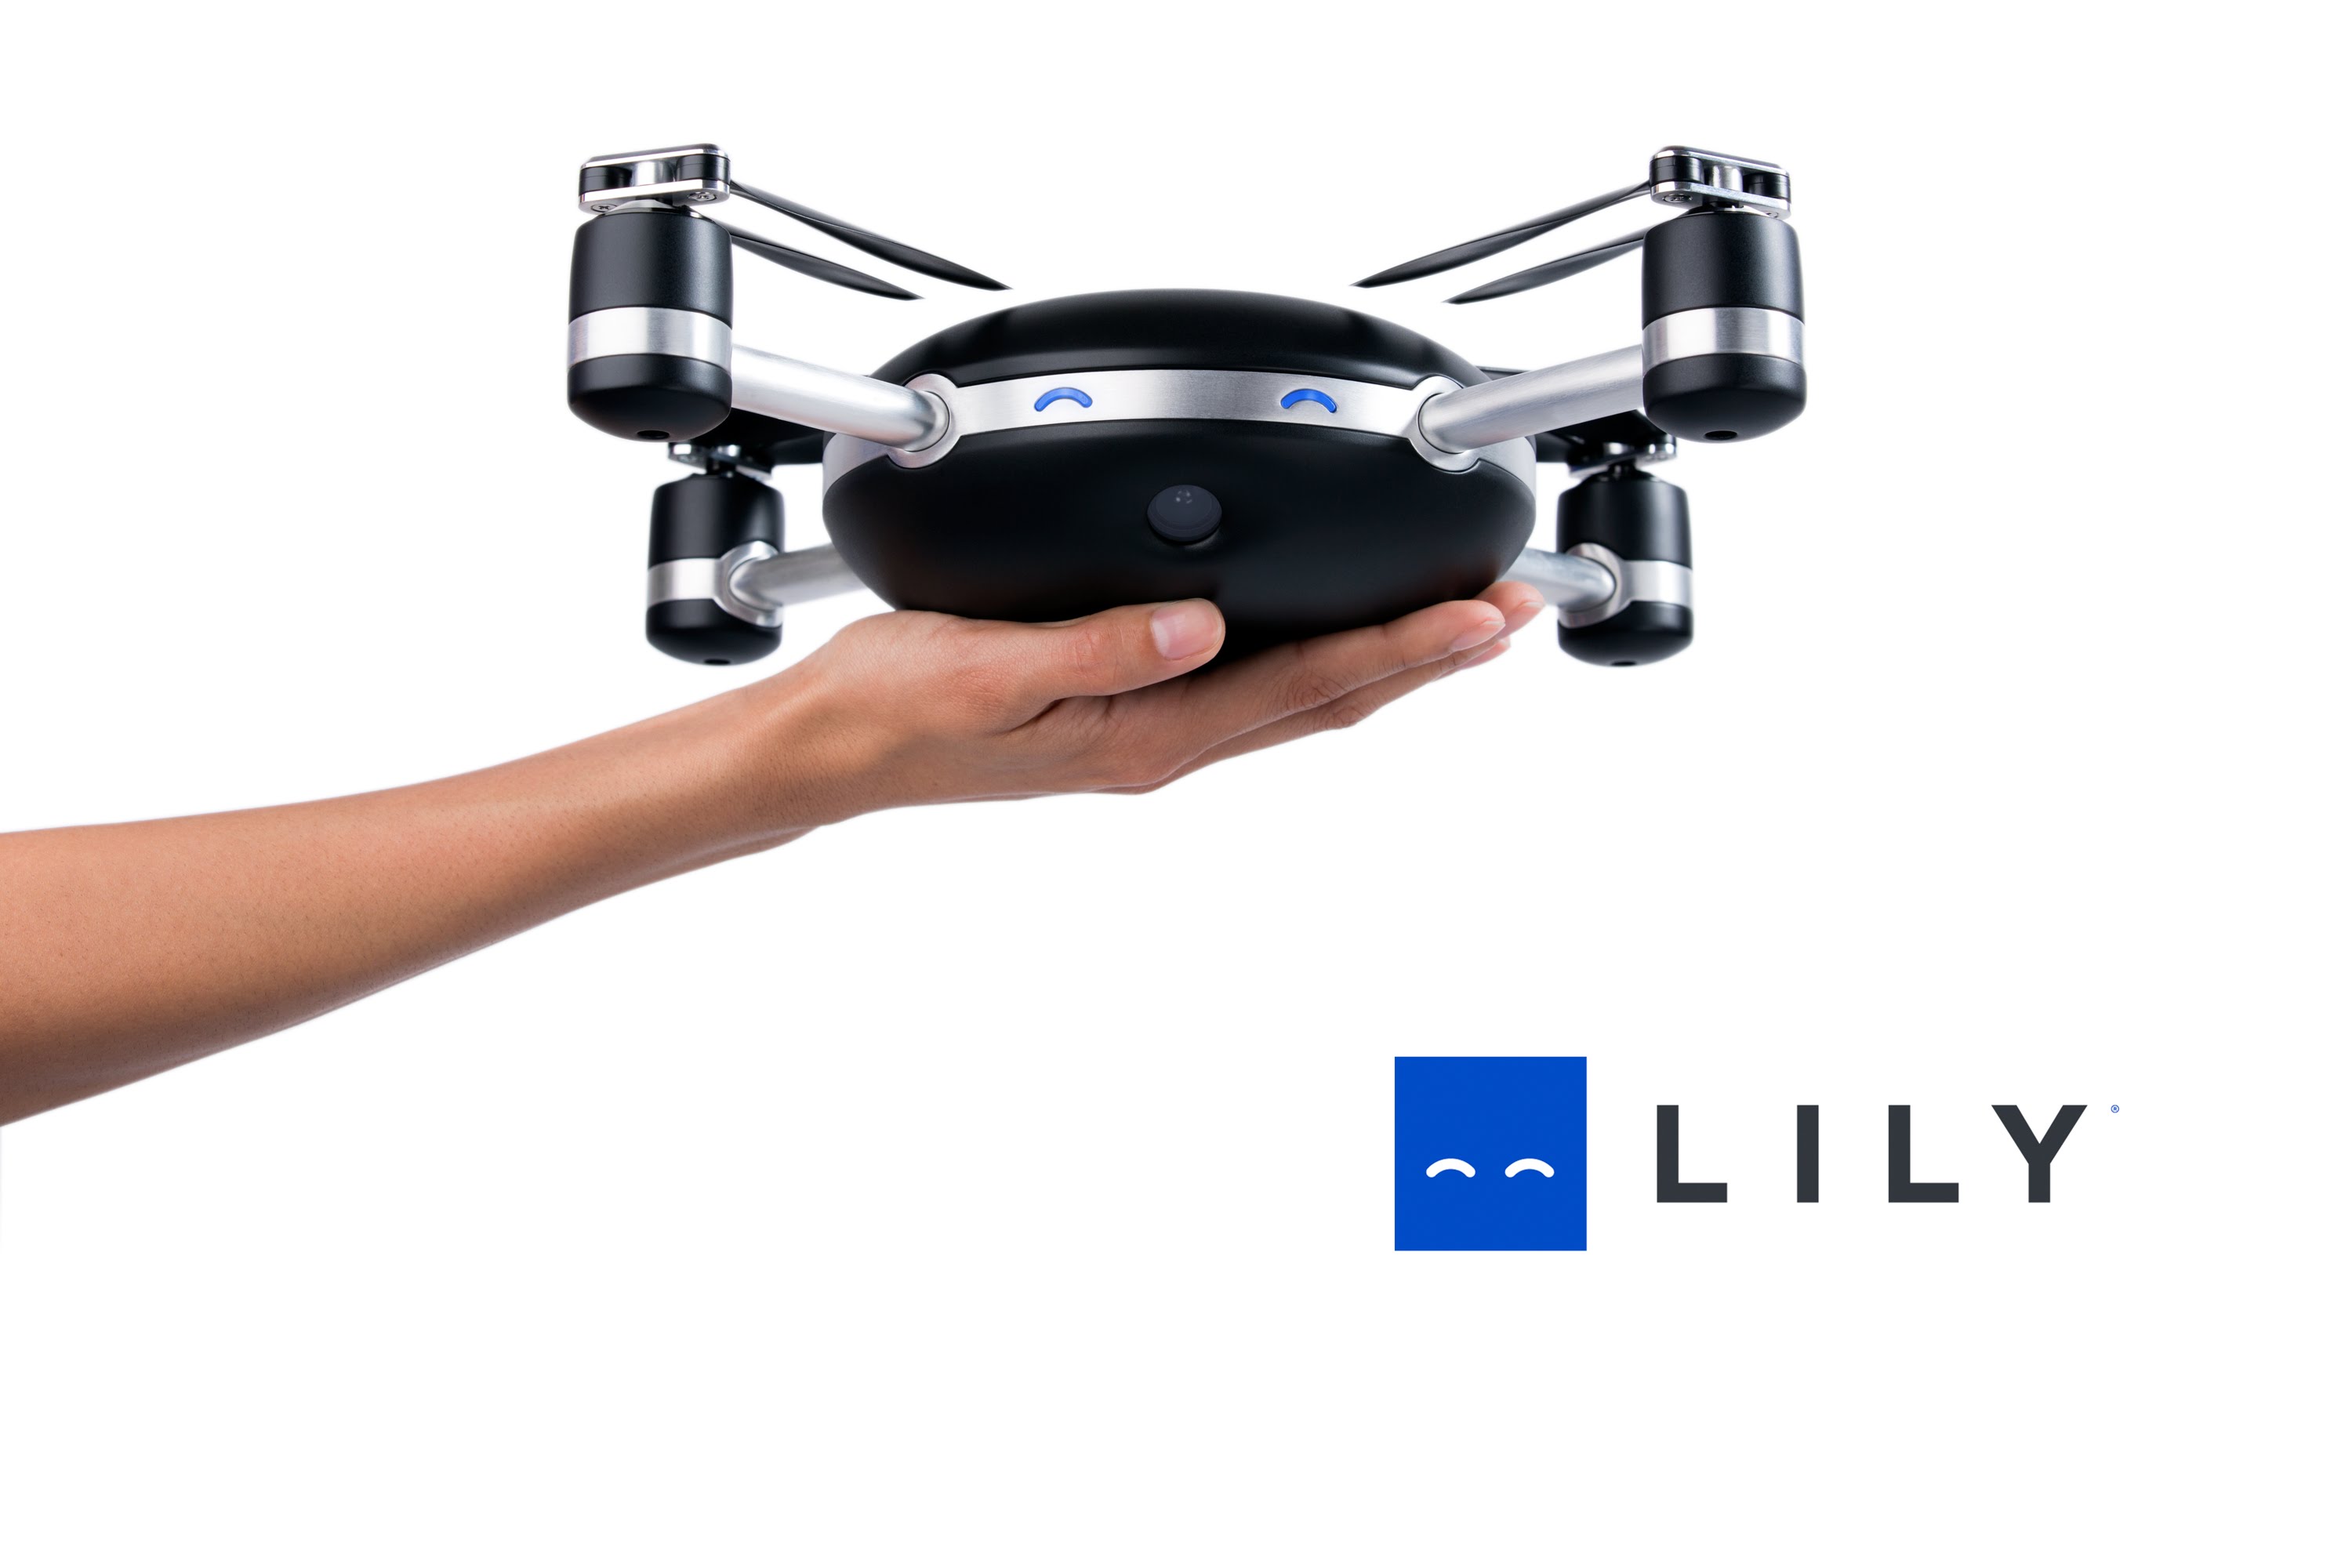 LILY CAMERA THE WATERPROOF DRONE